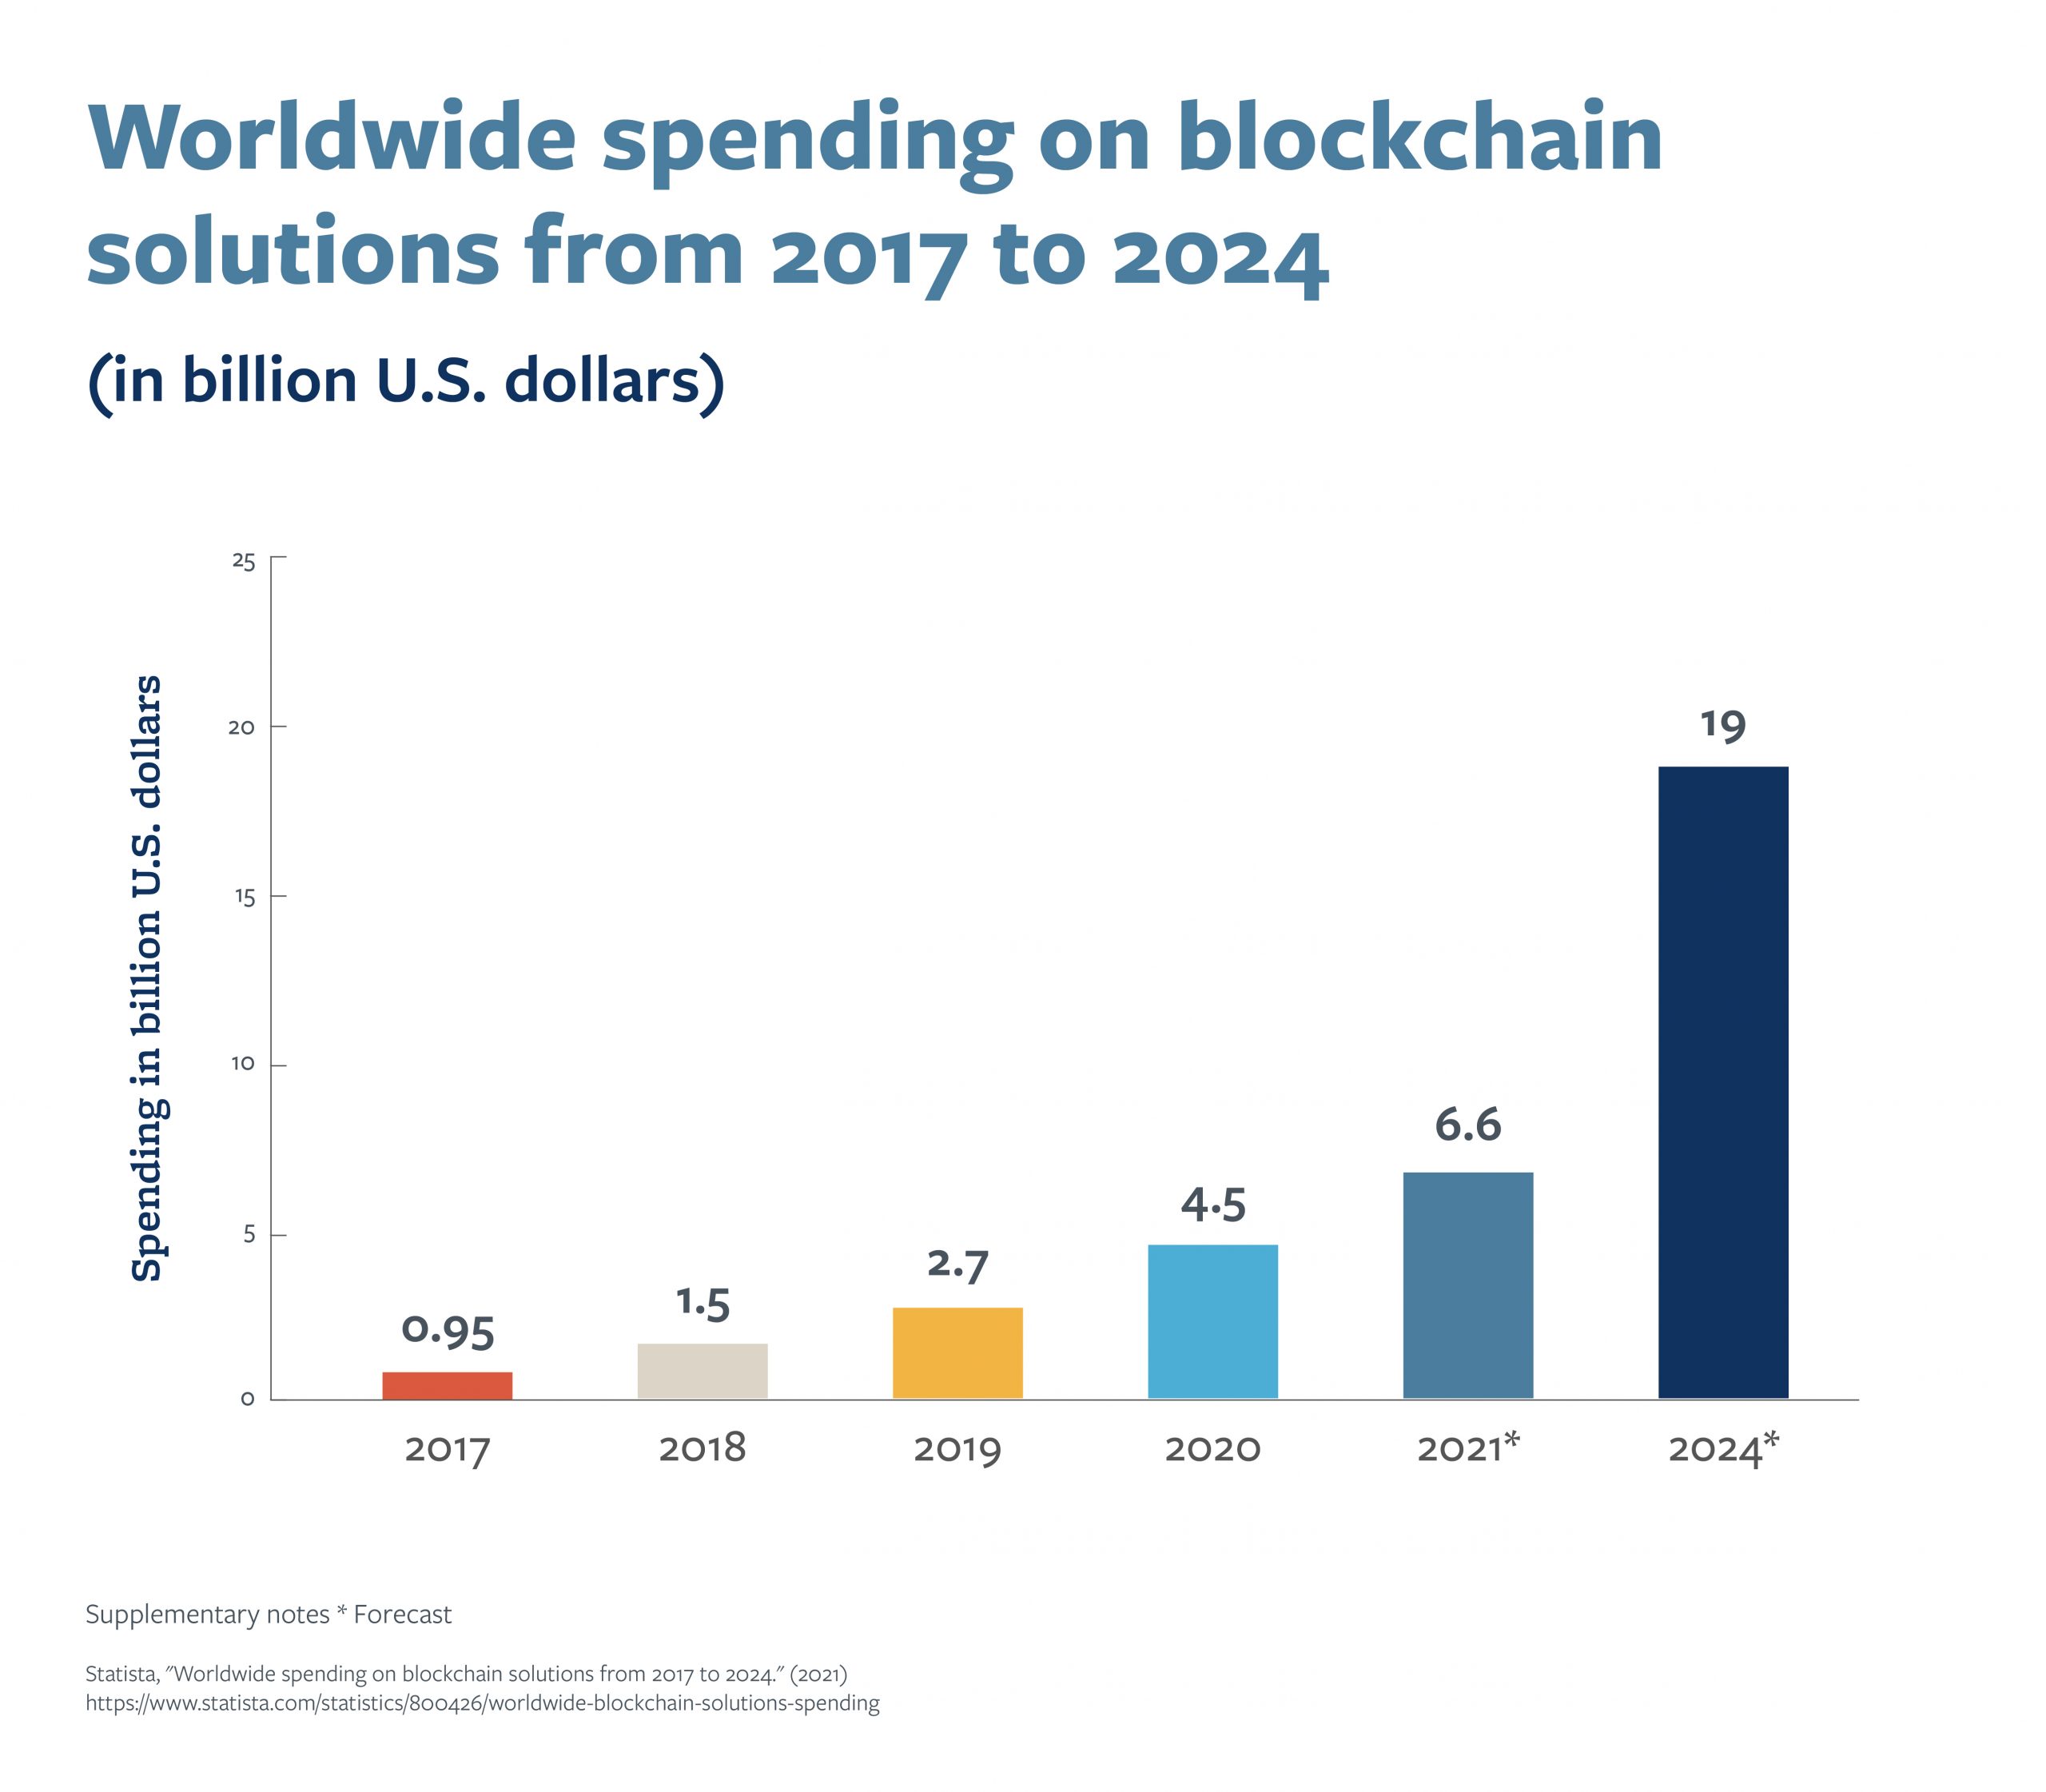 A bar graph that highlights projected worldwide spending on blockchain solutions through 2024.